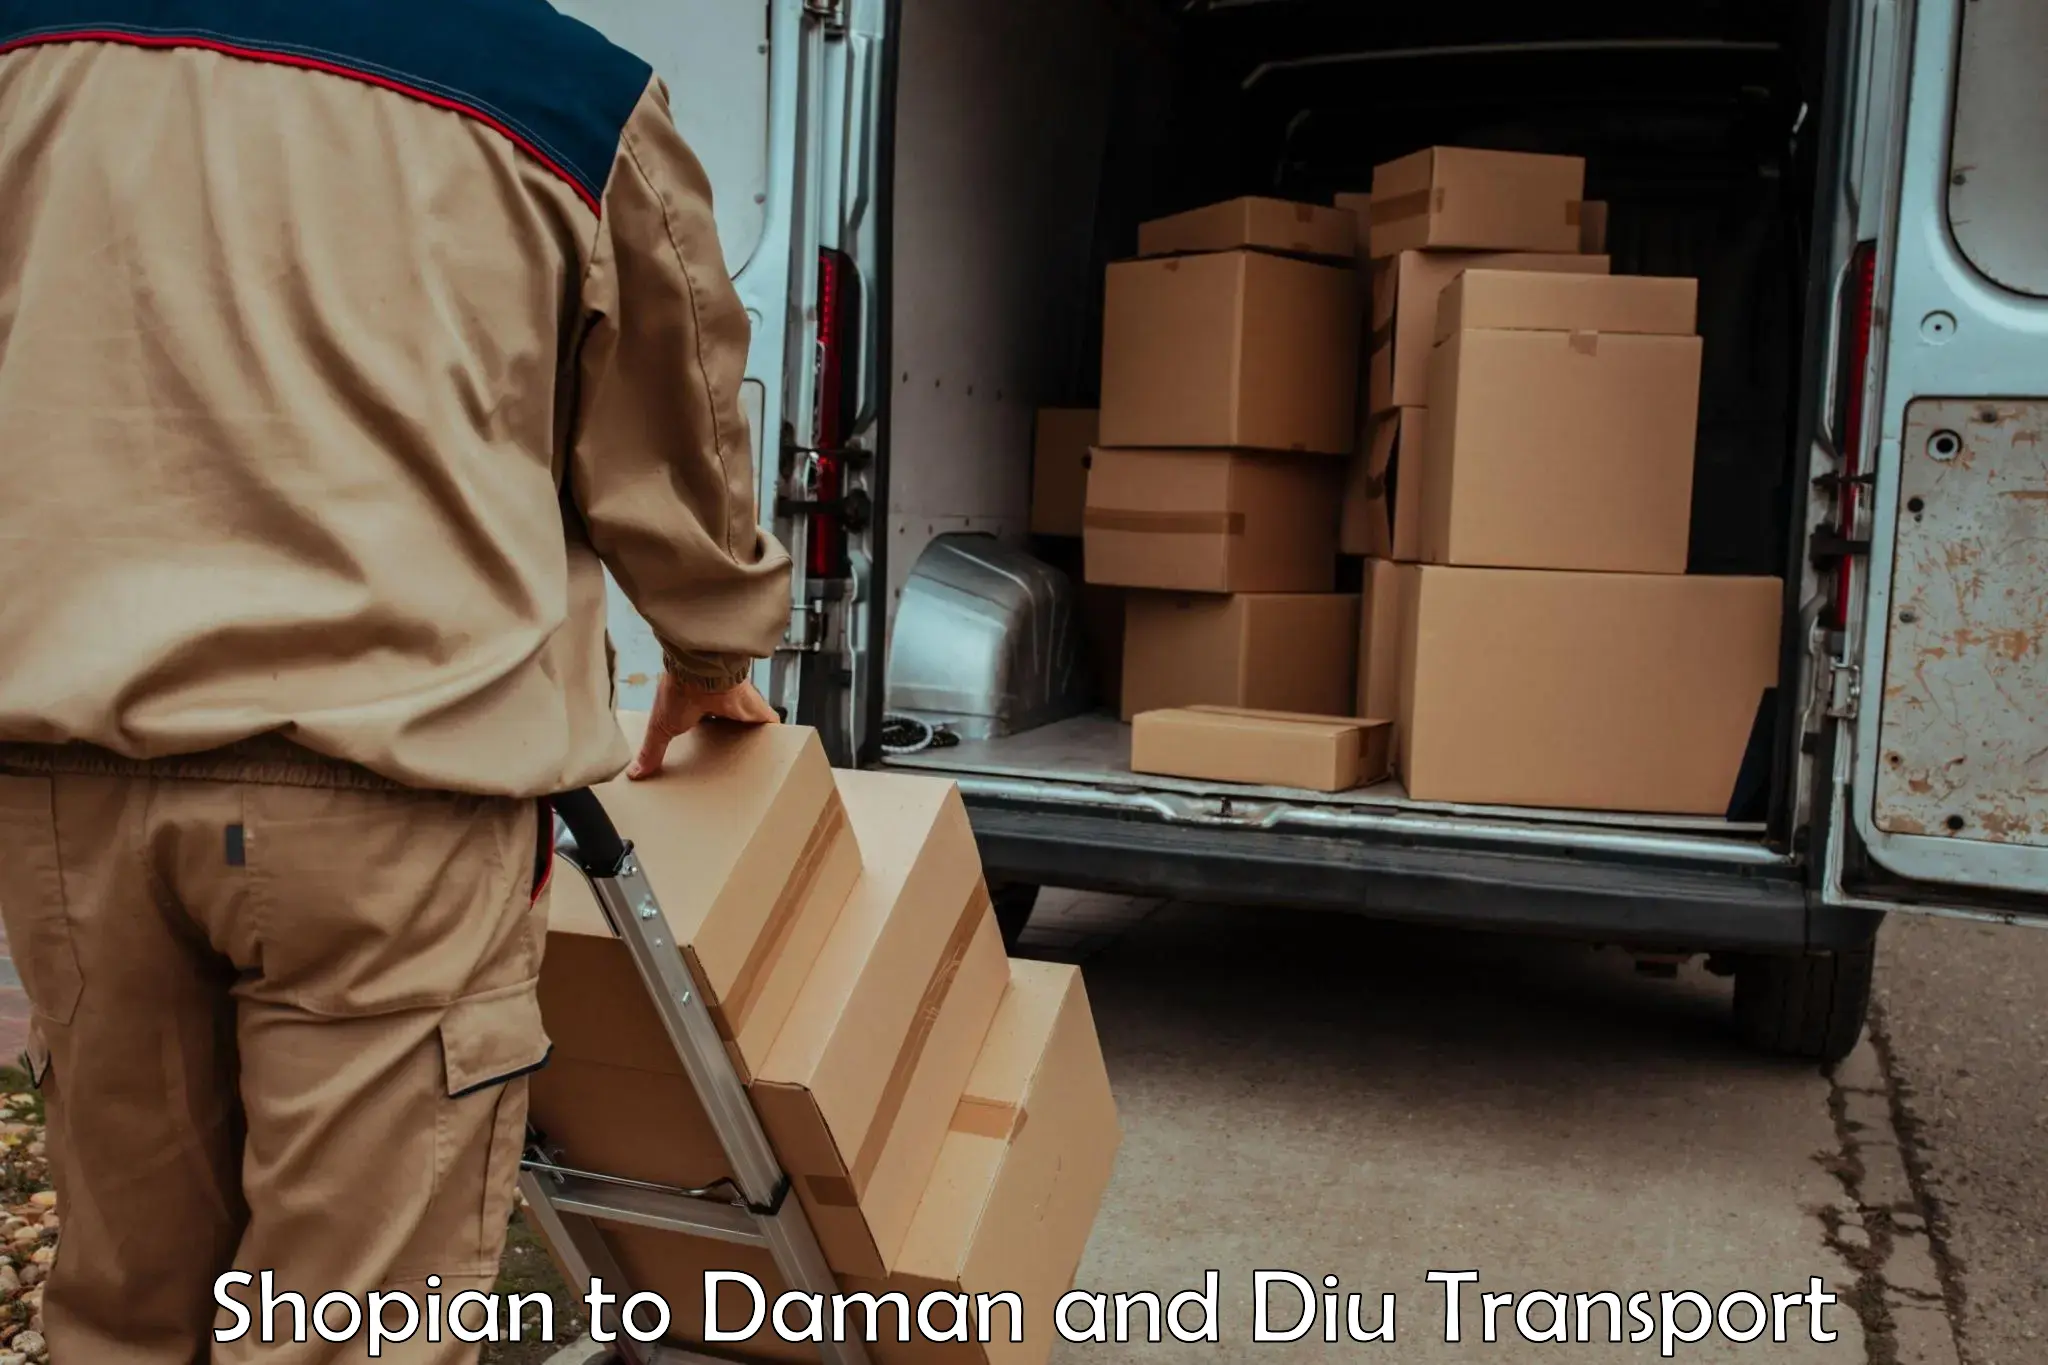 Package delivery services Shopian to Daman and Diu